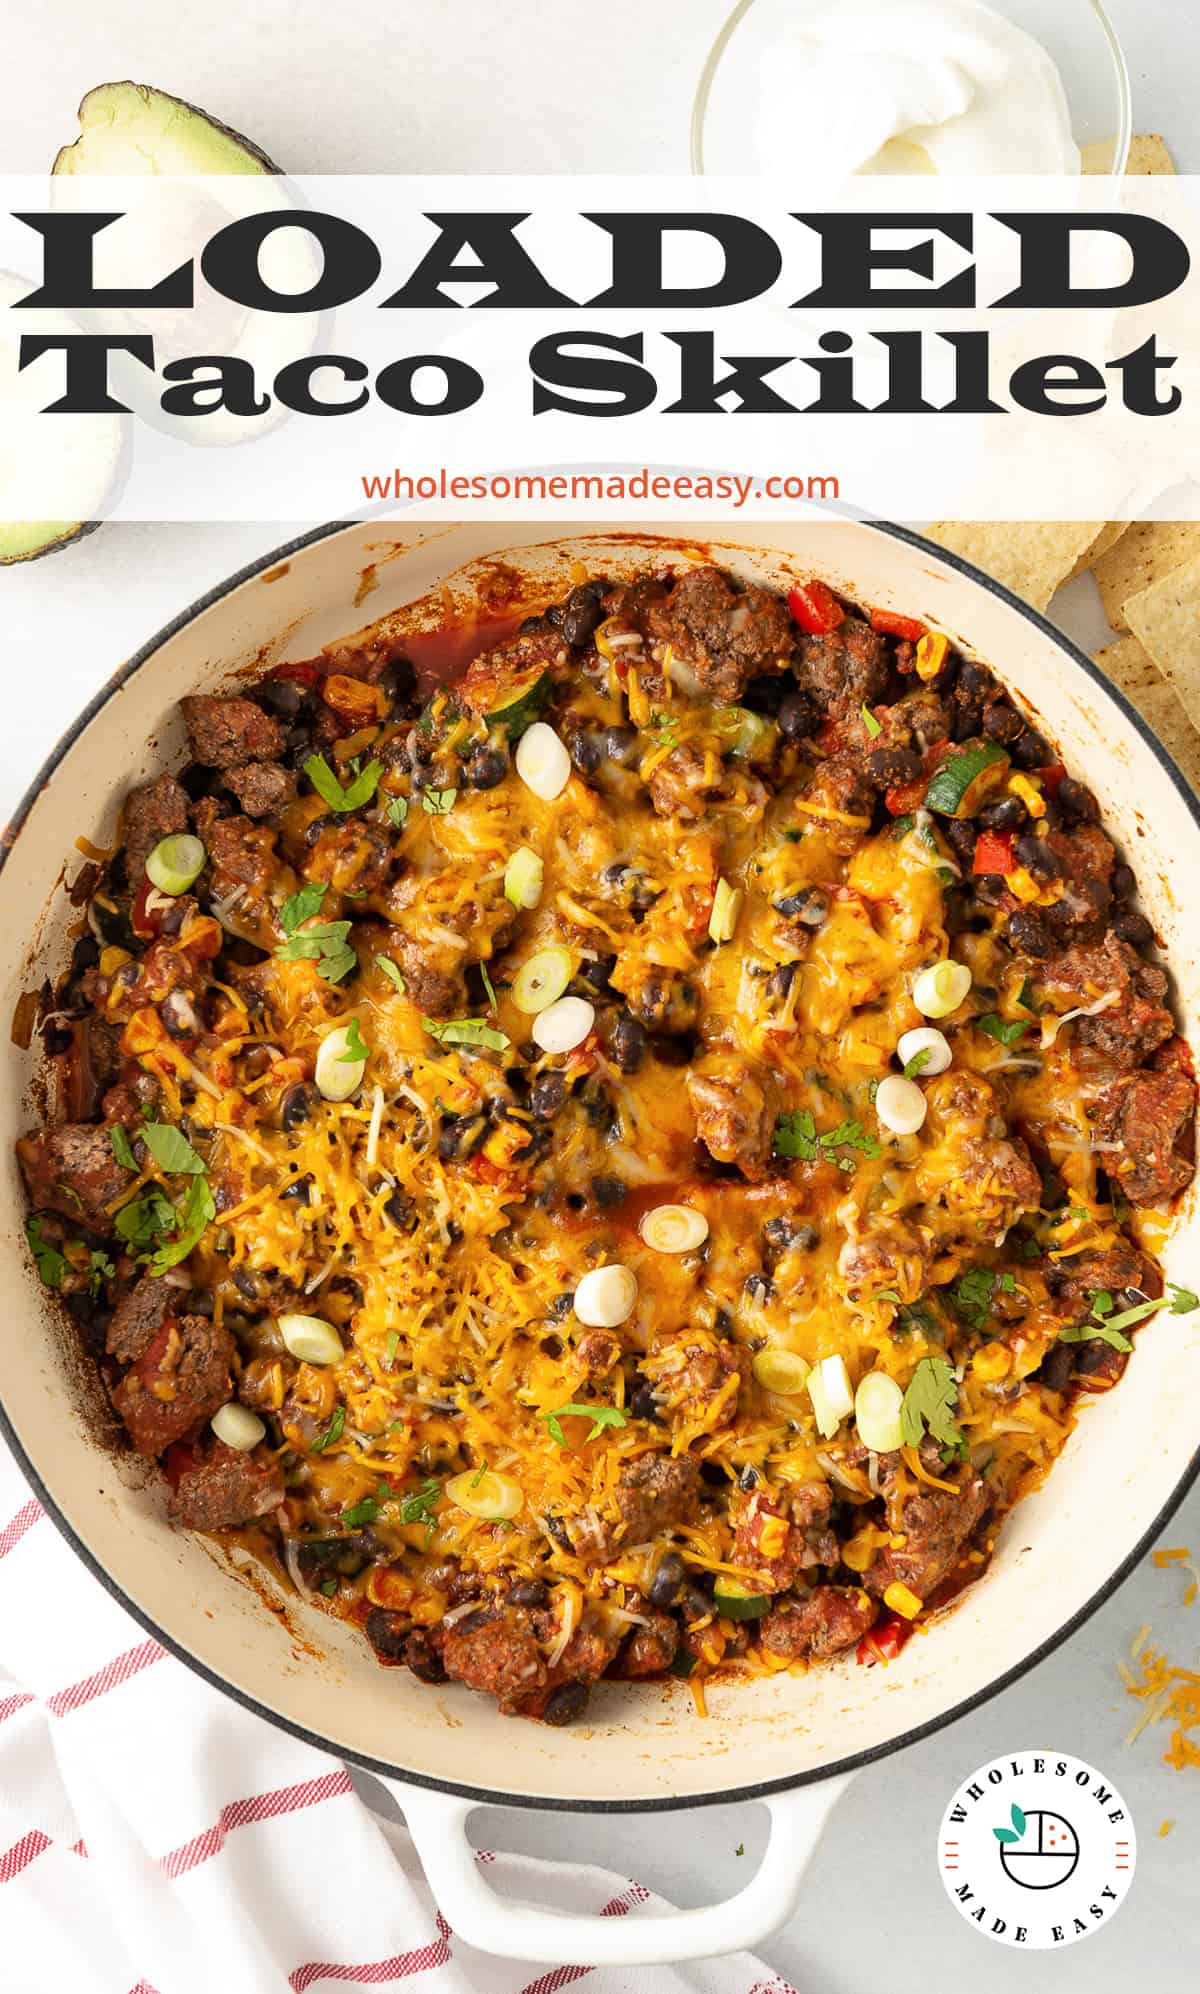 Loaded Taco Skillet in a white skillet with text overlay.